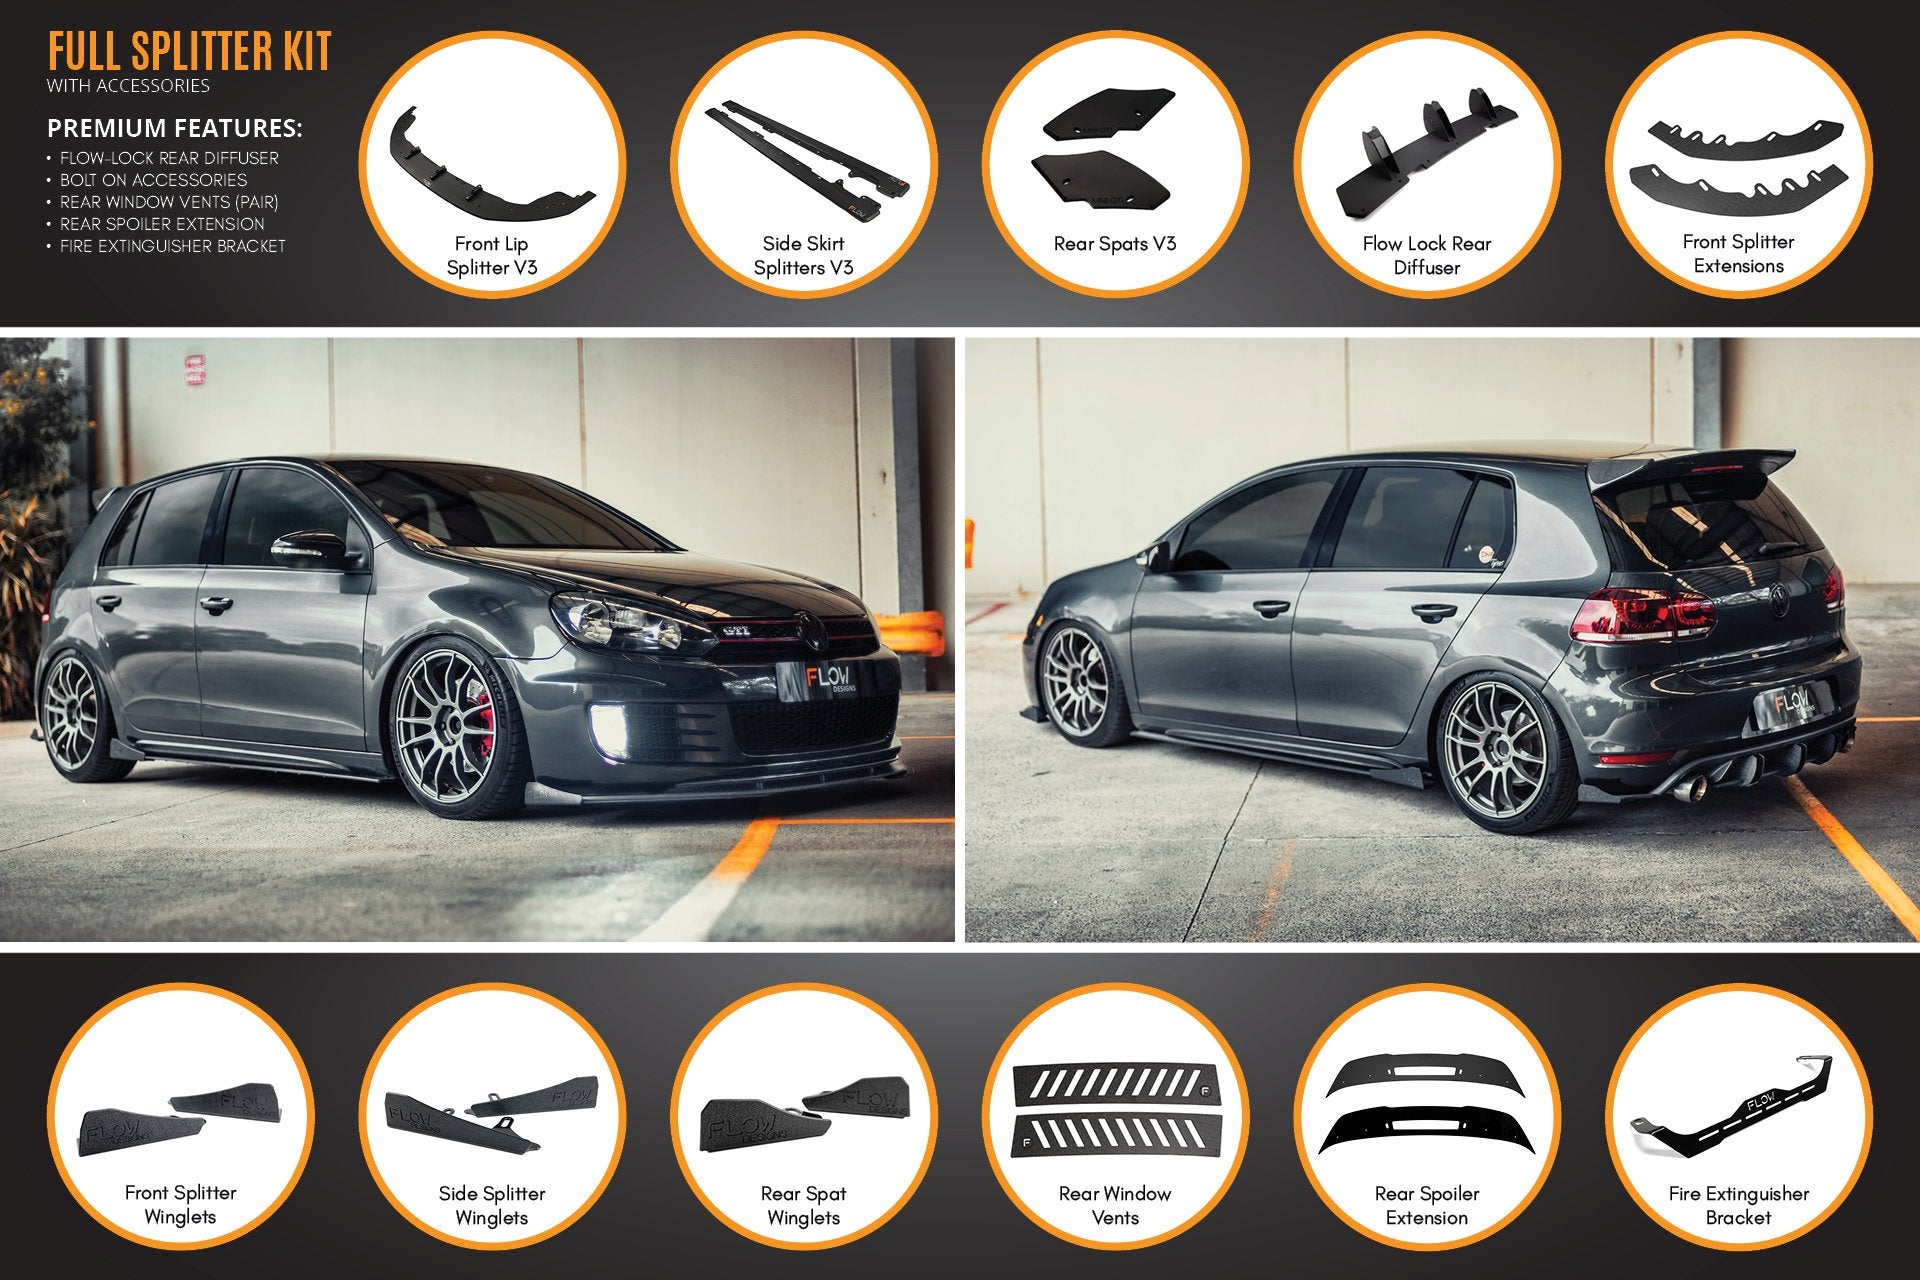 Exterior car Golf VI (2008-2012)  Purchase parts for vehicle exterior body  kits with delivery